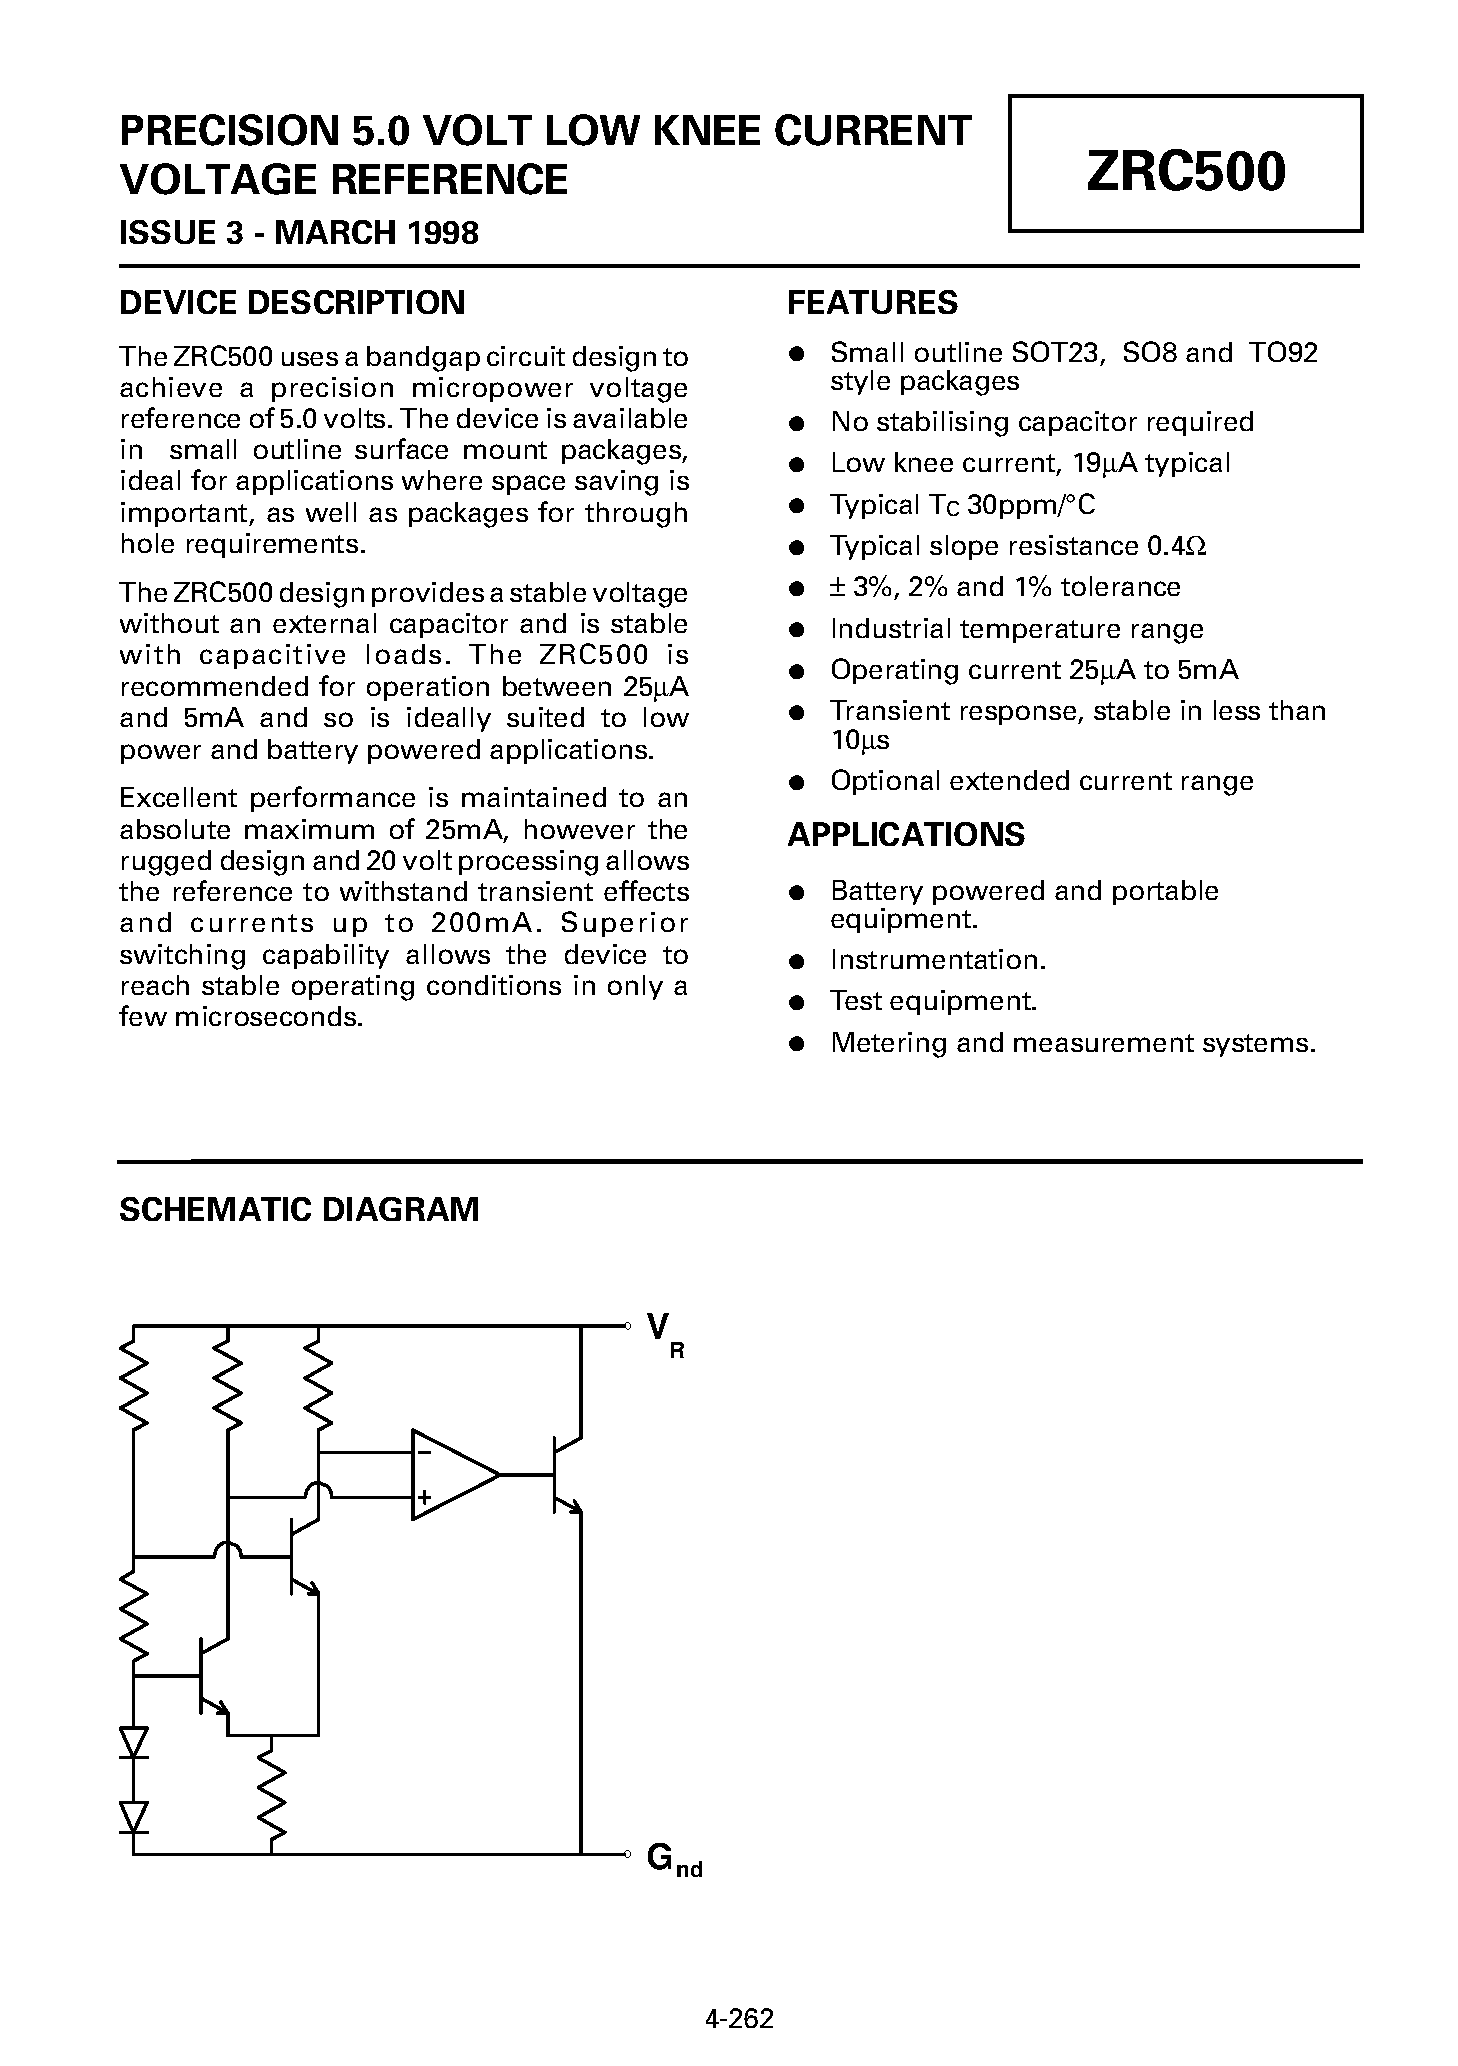 Datasheet ZRC500Y03 - PRECISION 5.0 VOLT LOW KNEE CURRENT VOLTAGE REFERENCE page 1